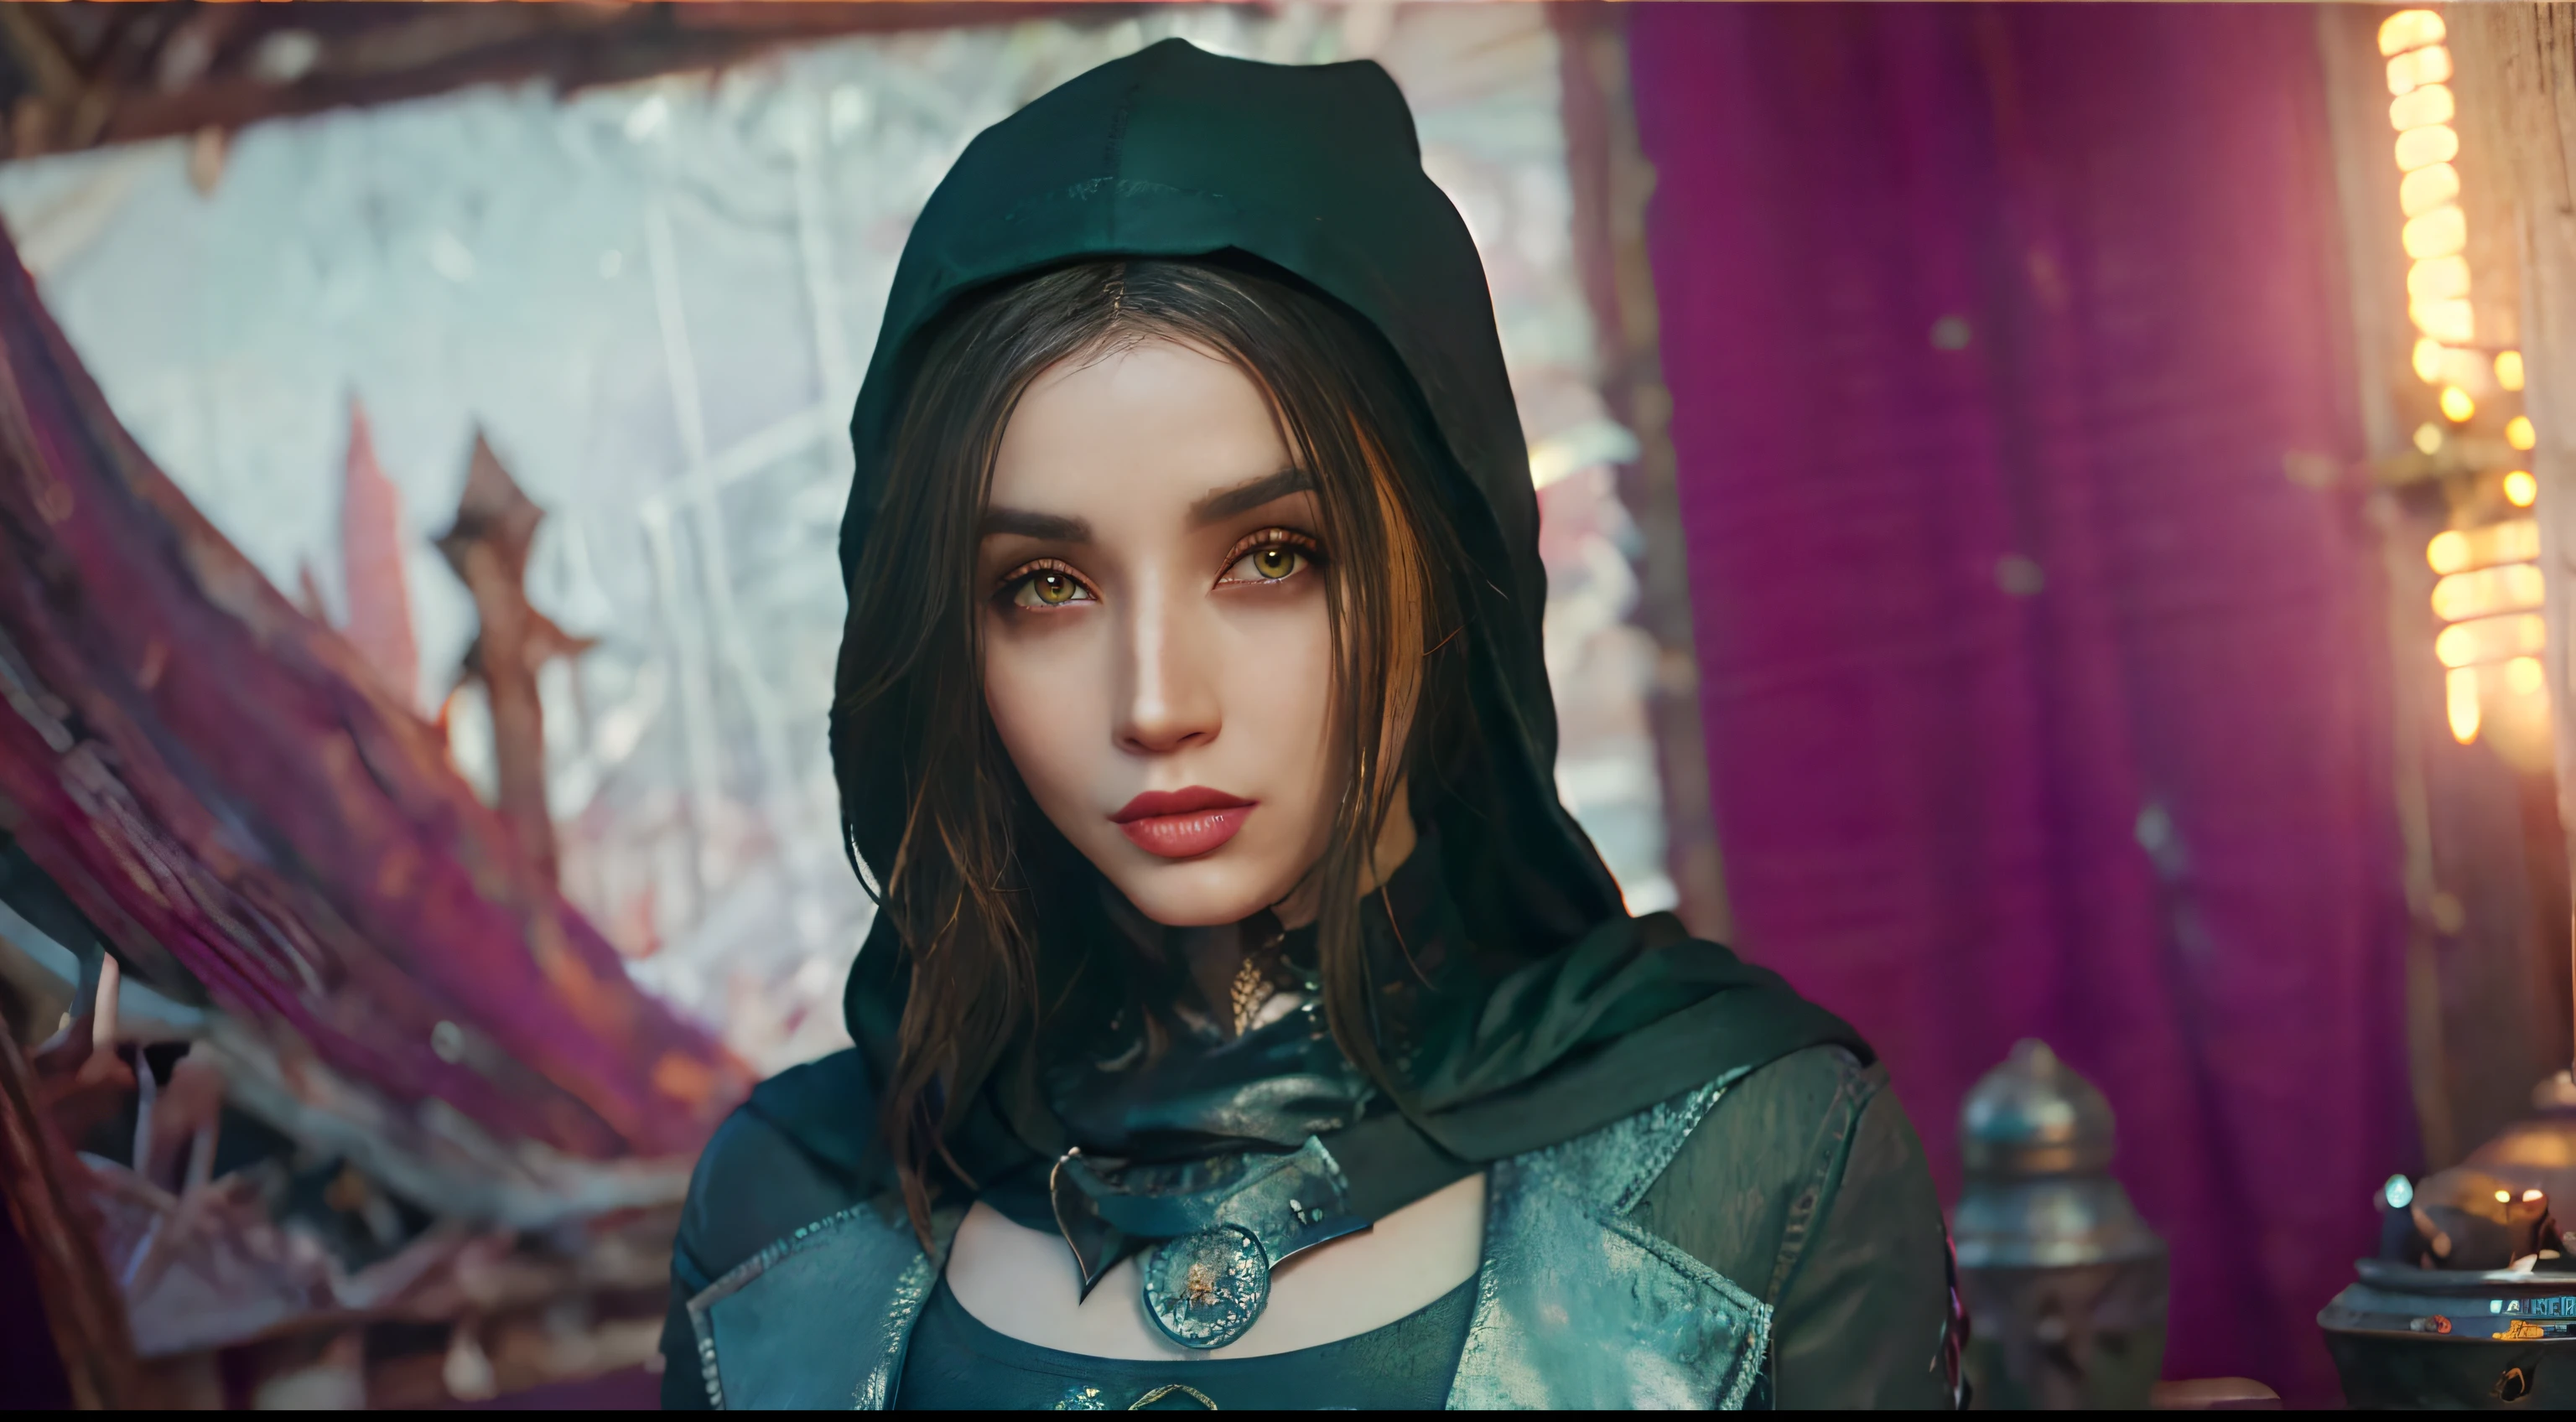 Port Reimagined, ana de armas, master part, best qualityer, there is 1 girl alone, Hood, Eyes red, vampire fangs, blackquality hair, Looking at Viewer, mitts, choker, hood up, long  hair, upperbody, gloves fingerless, gaping mouth, suit jacket, tooth, Realistic, leathery, jewelries, jacket with a hood, medium breasts, posing for a waist-up photo, Pose sexy, ultra realistic, high resolution, swirly vibrant colors, stunning digital illustration, Face pretty. ダークファンタジー, epic fantasy art portrait, dark fantasy style art, detailed matte fantasy portrait, no estilo da arte da ダークファンタジー, beautiful fantasy art portrait, dark fantasy portrait, Epic Fantasy Digital Art Style, fantasy art portrait, gorgeous digital painting, digital fantasy portrait, arafed woman in a black and red costume holding a candle, artgerm julie bell beeple, Alena Aenami e Artgerm, alexandra fomina artstation, alluring mesmer woman, aly fell and artgerm, wlop and artgerm, 极其详细的Artgerm, Skyrim Art Style